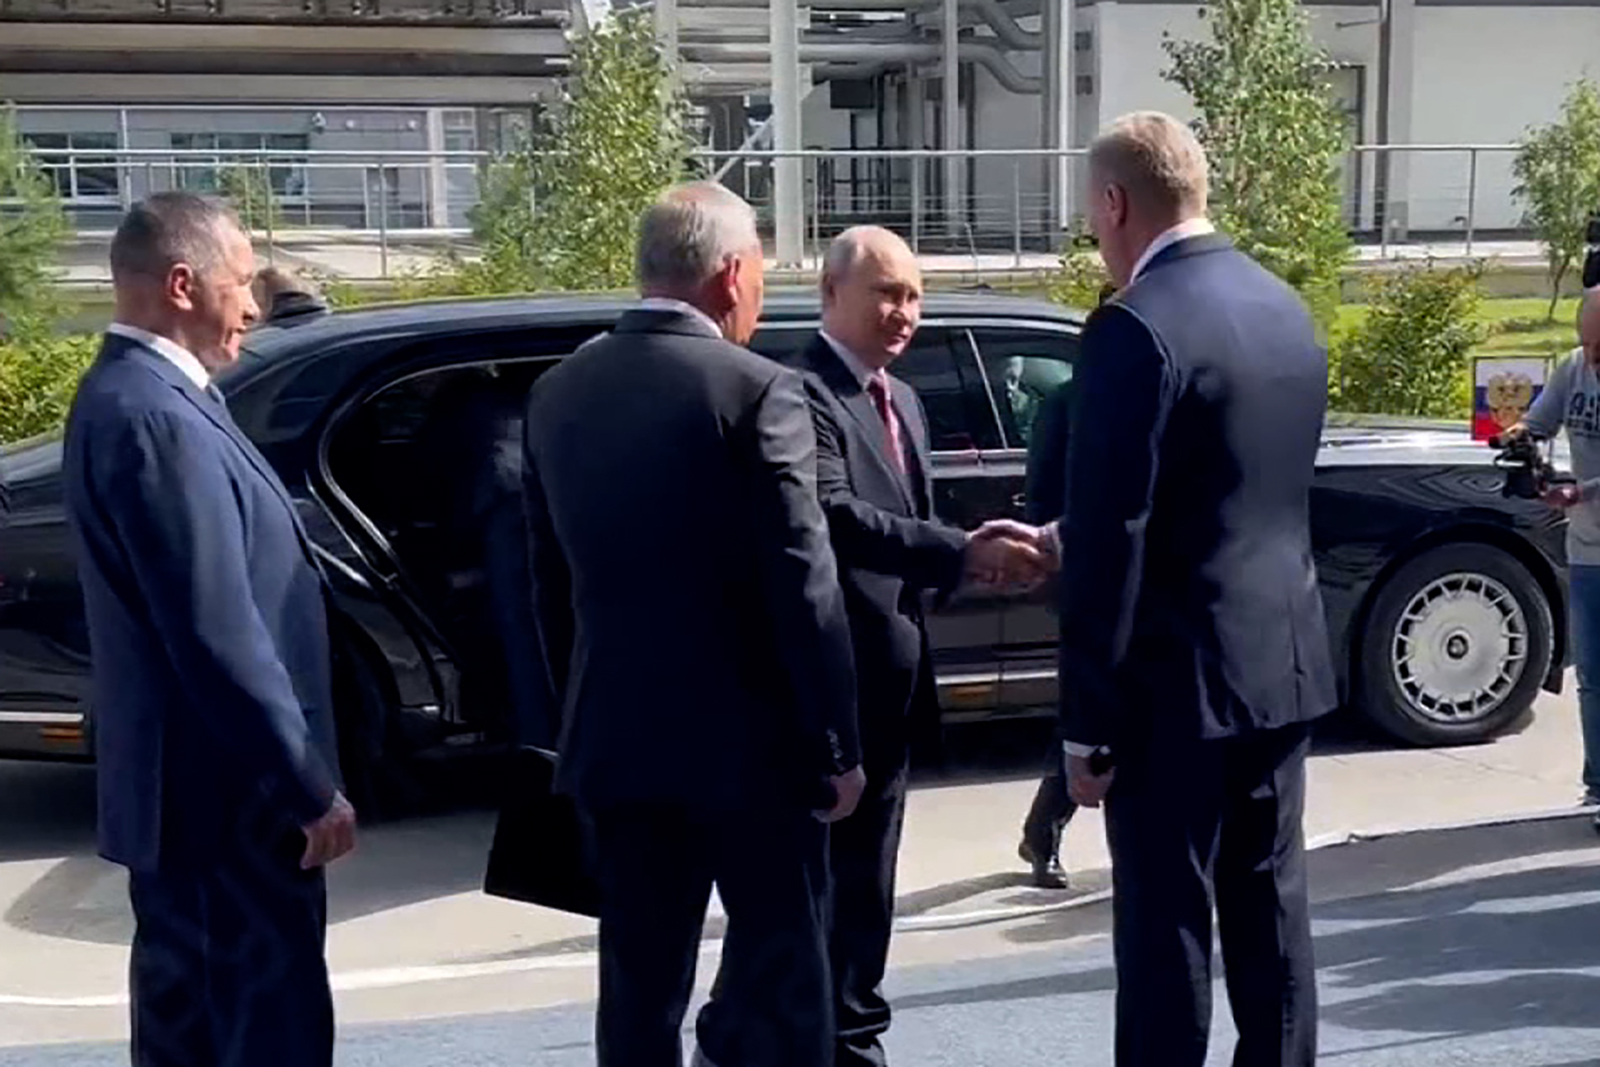 Vladimir Putin arrived at the Russia’s space rocket launch site, the Vostochny Cosmodrome in Amur region, Russia.